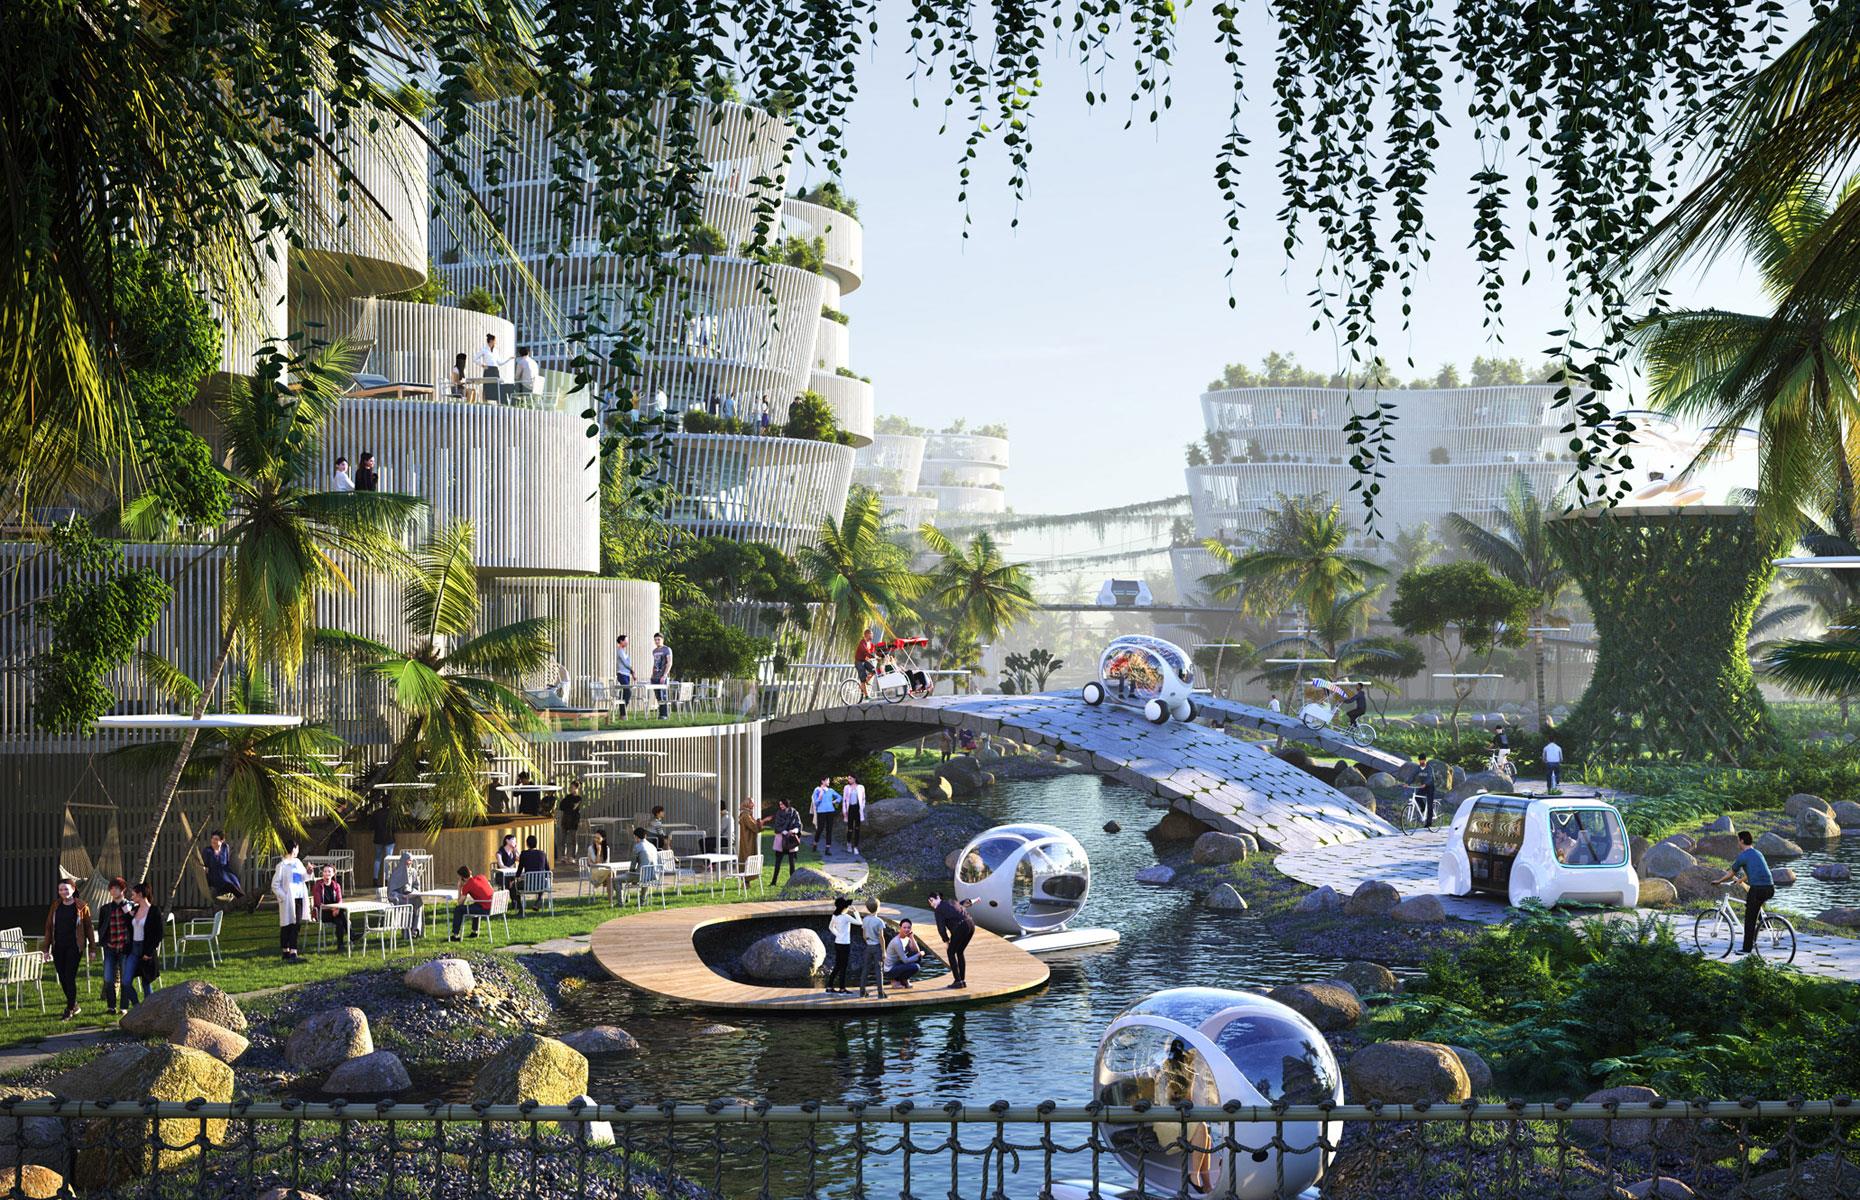 <p>Each isle was to have up to 18,000 residents. The first set to be built, the Channels, would feature a 'Civic Heart' with government and research institutions, a hi-tech digital park, cultural and leisure facilities and residential areas. The second, which was called the Mangroves, would serve as a venue for large-scale events and the third, the Laguna, would be a hub for eco-living.</p>